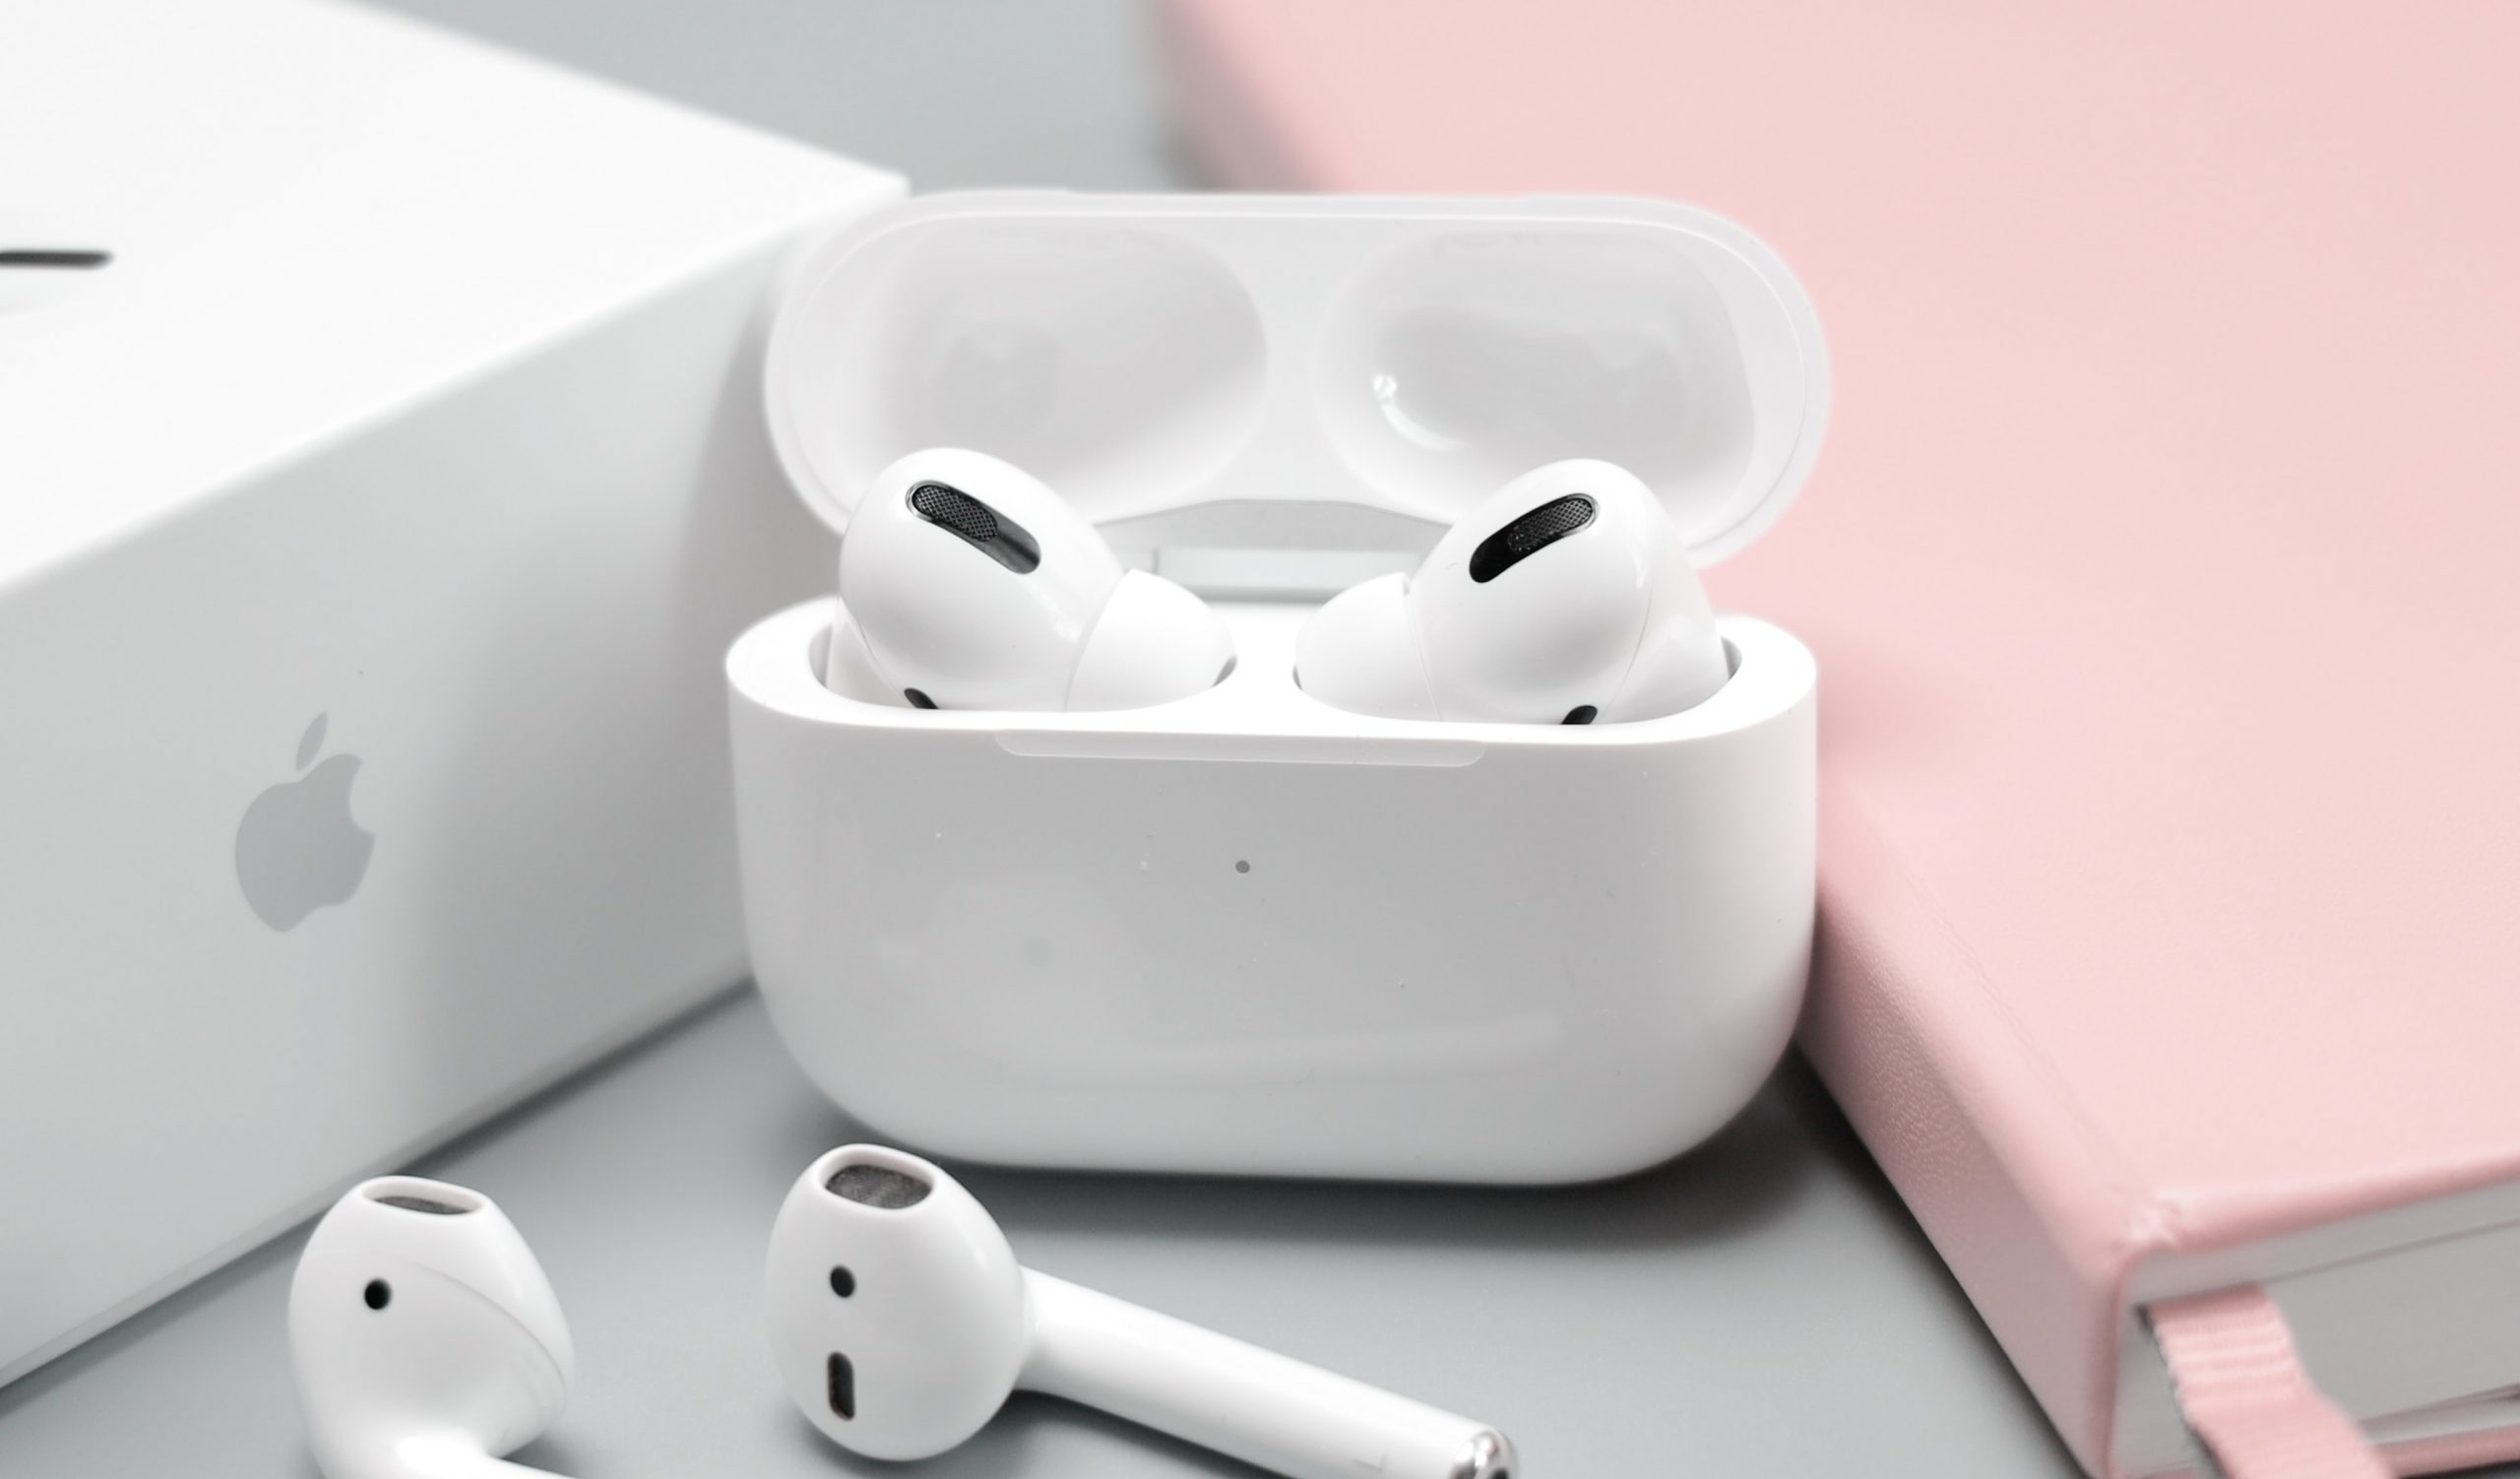 How to Fix Apple Wireless Earbuds that Work on One Side